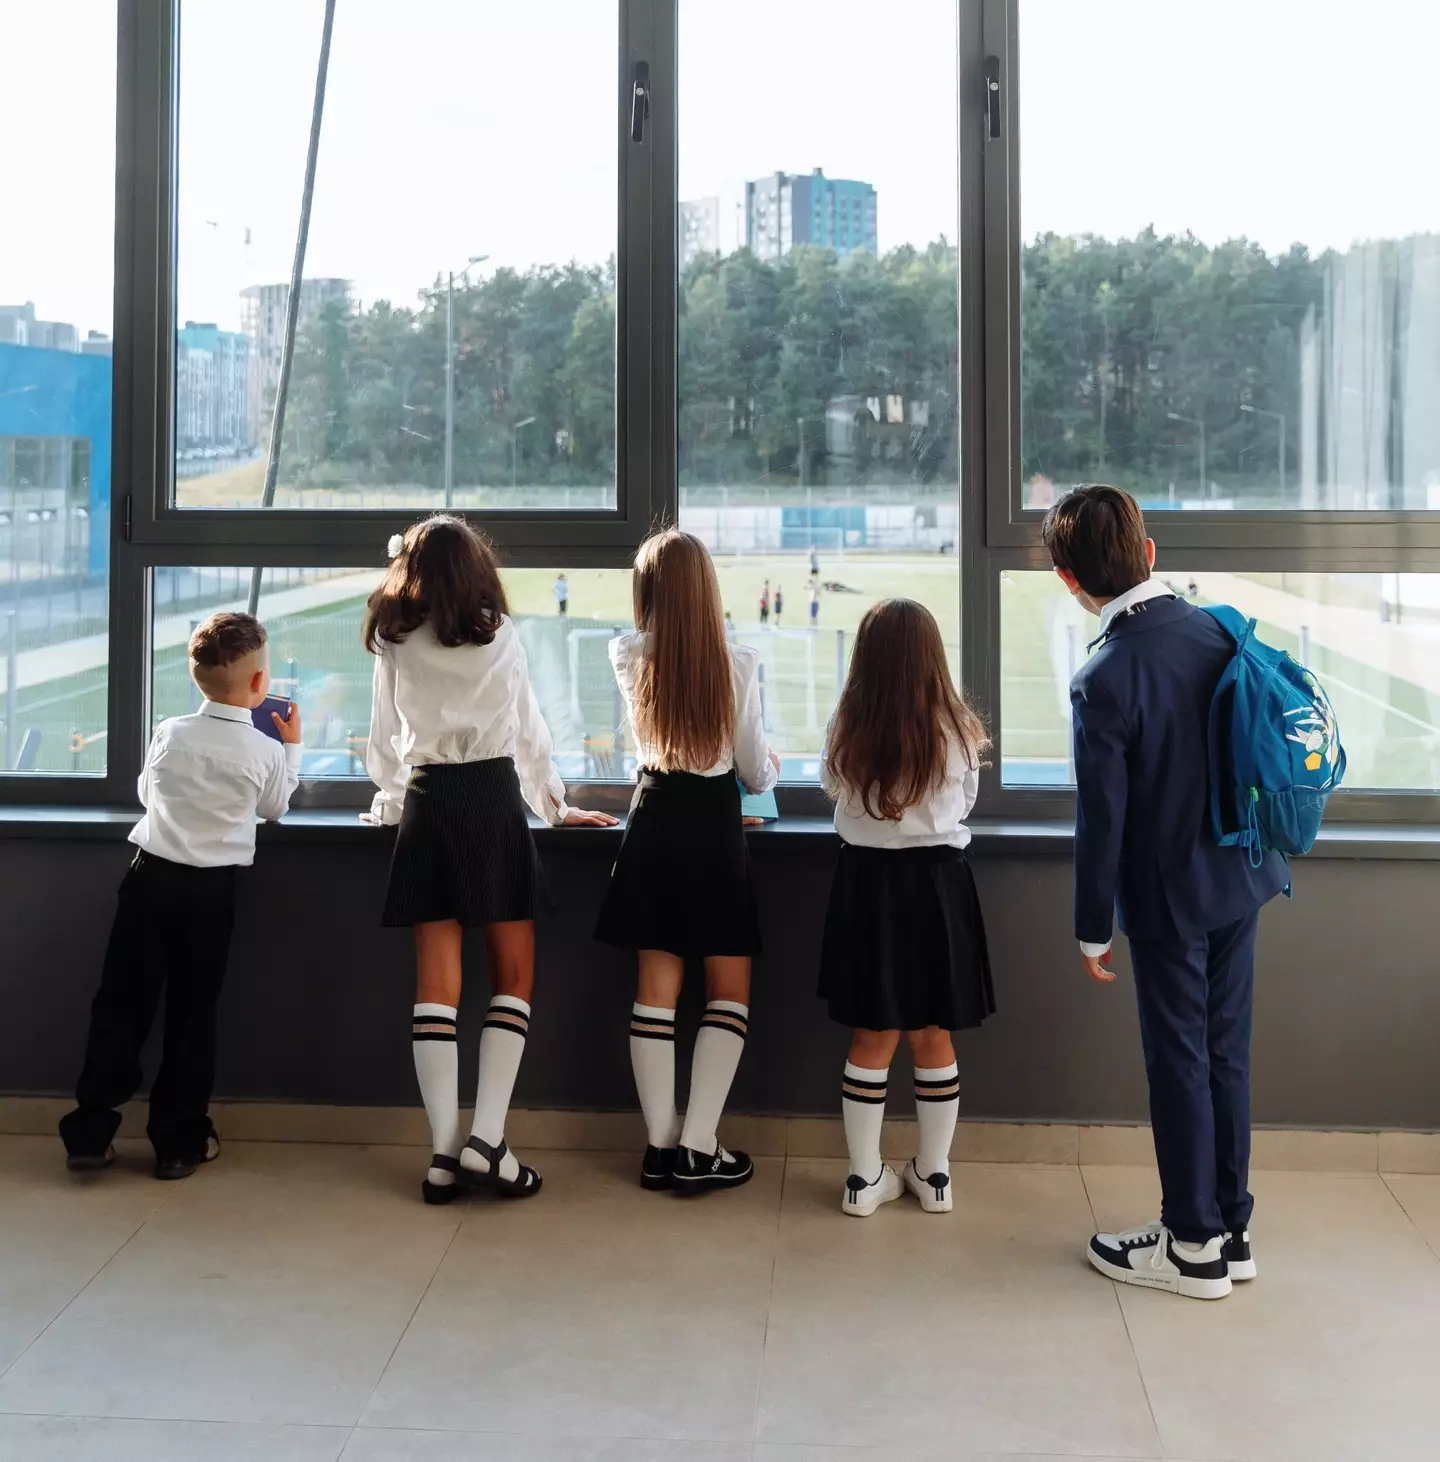 UK parents spend roughly £422 a year on secondary school uniforms and £287 for primary school uniforms.